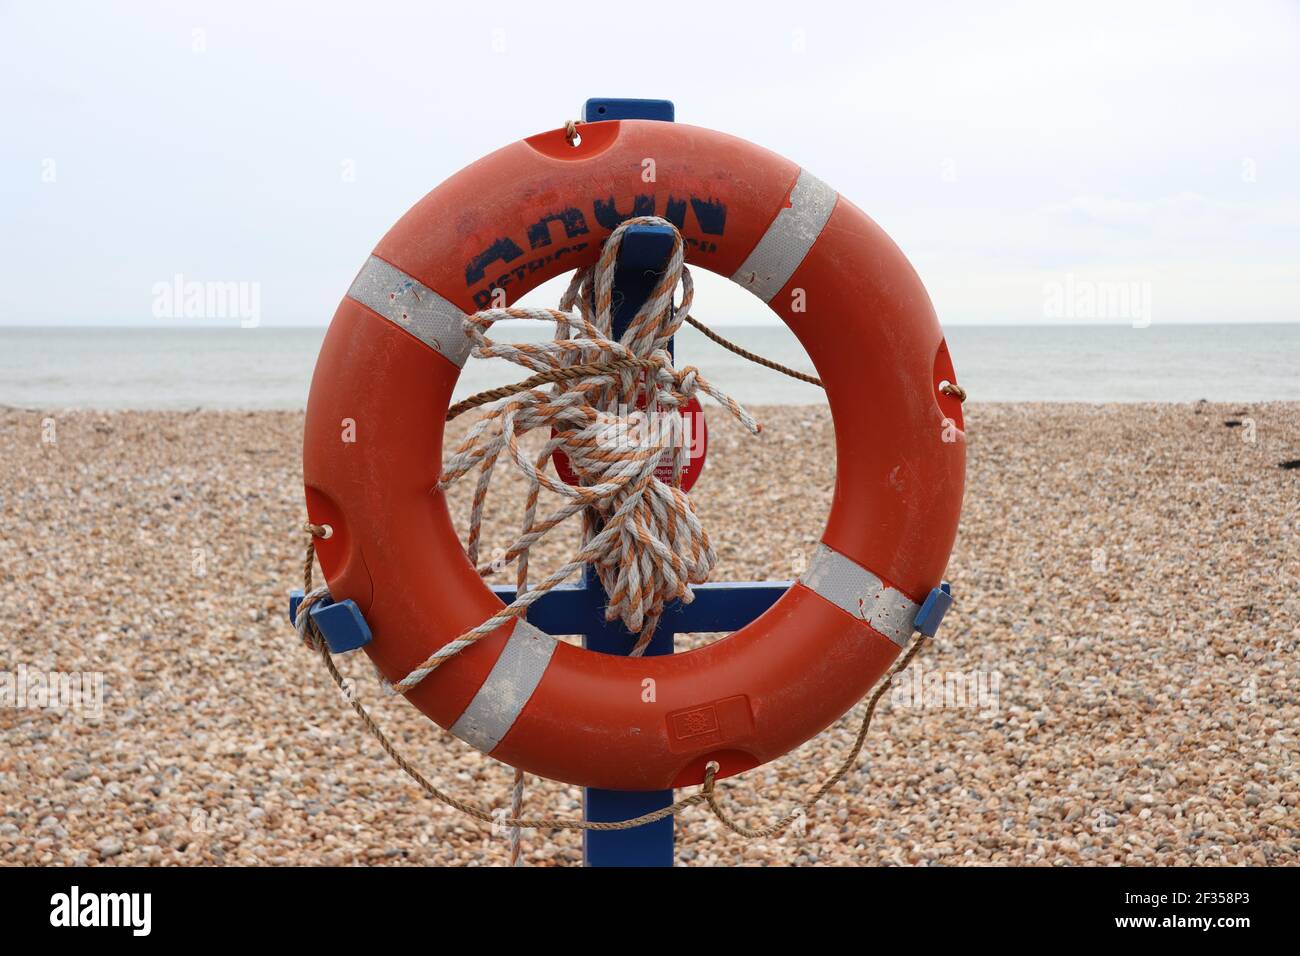 A life bouy or floatation device mounted near the beach Stock Photo